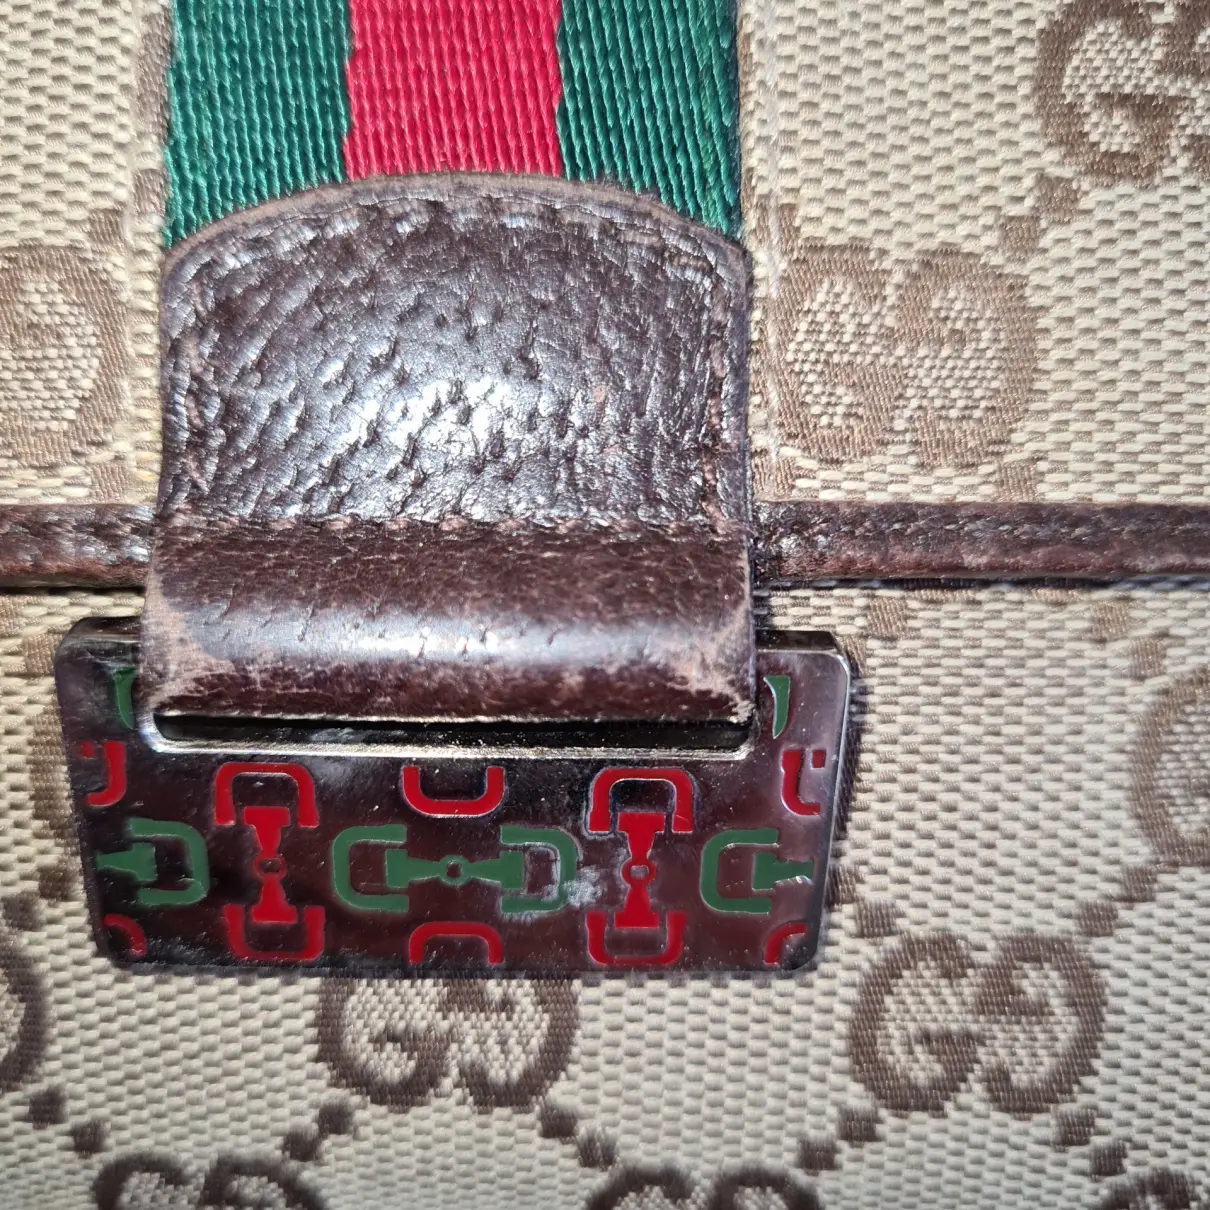 Ophidia wallet Gucci - Vintage